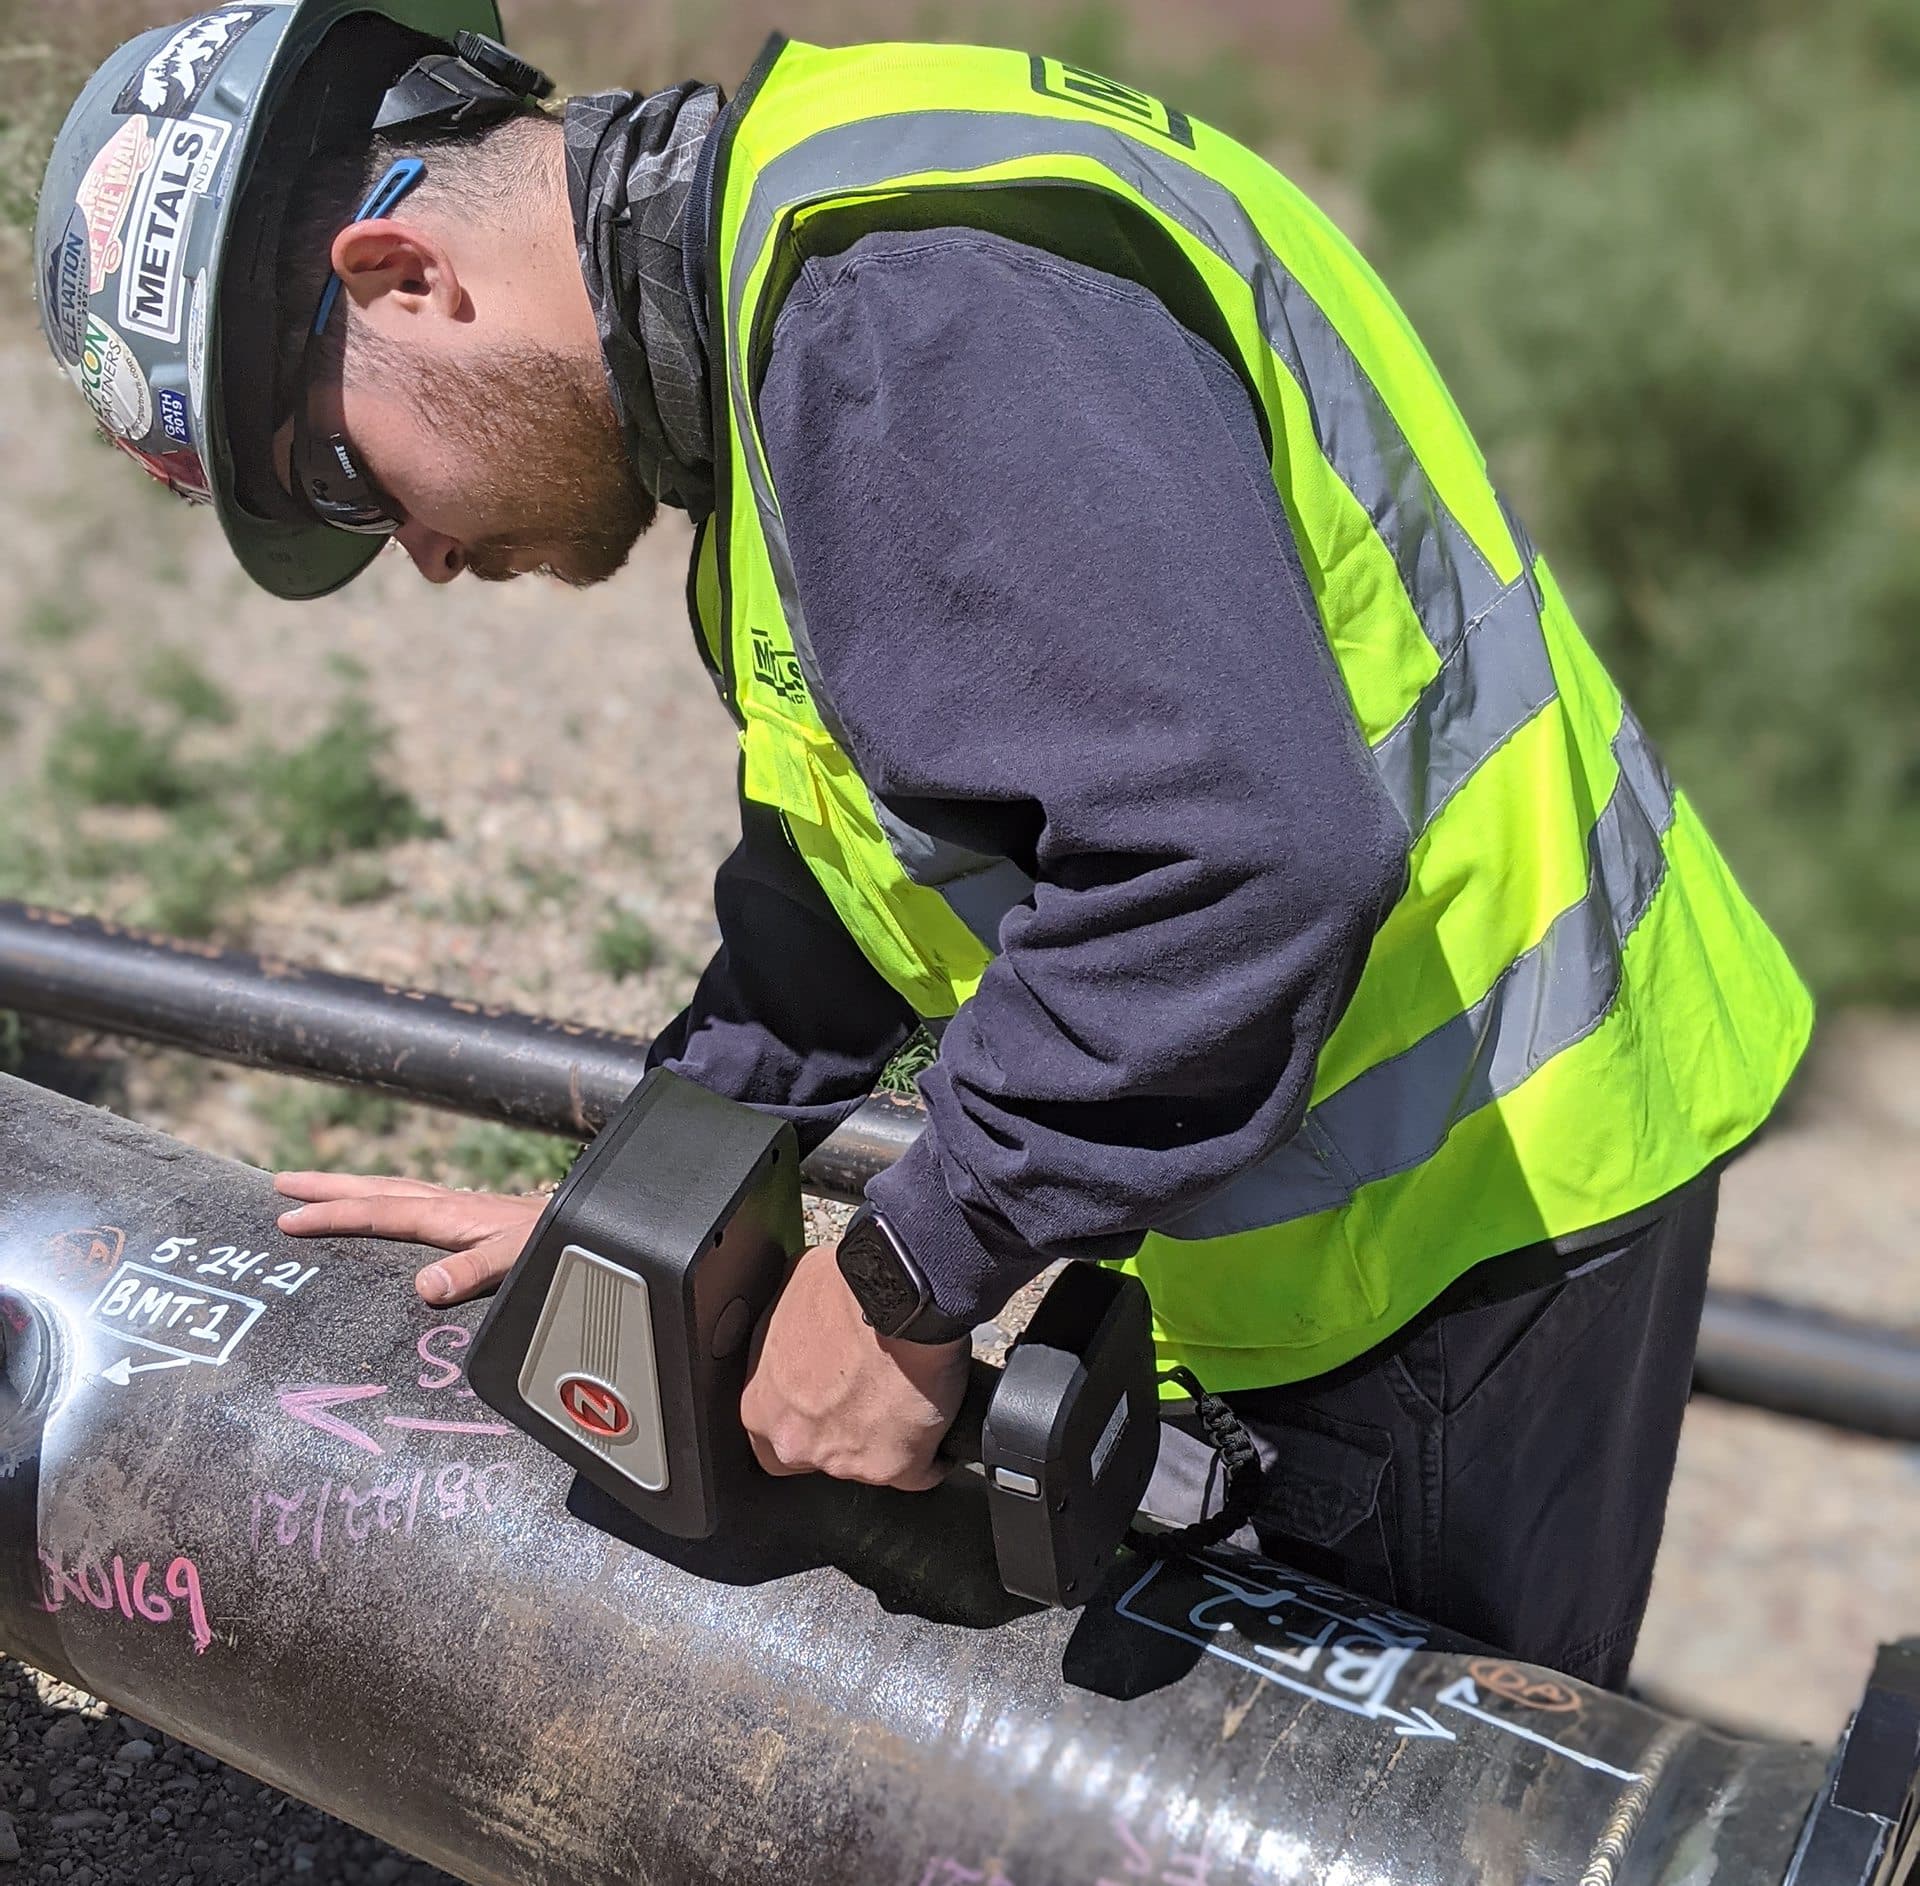 technician tests metal pipe for defects